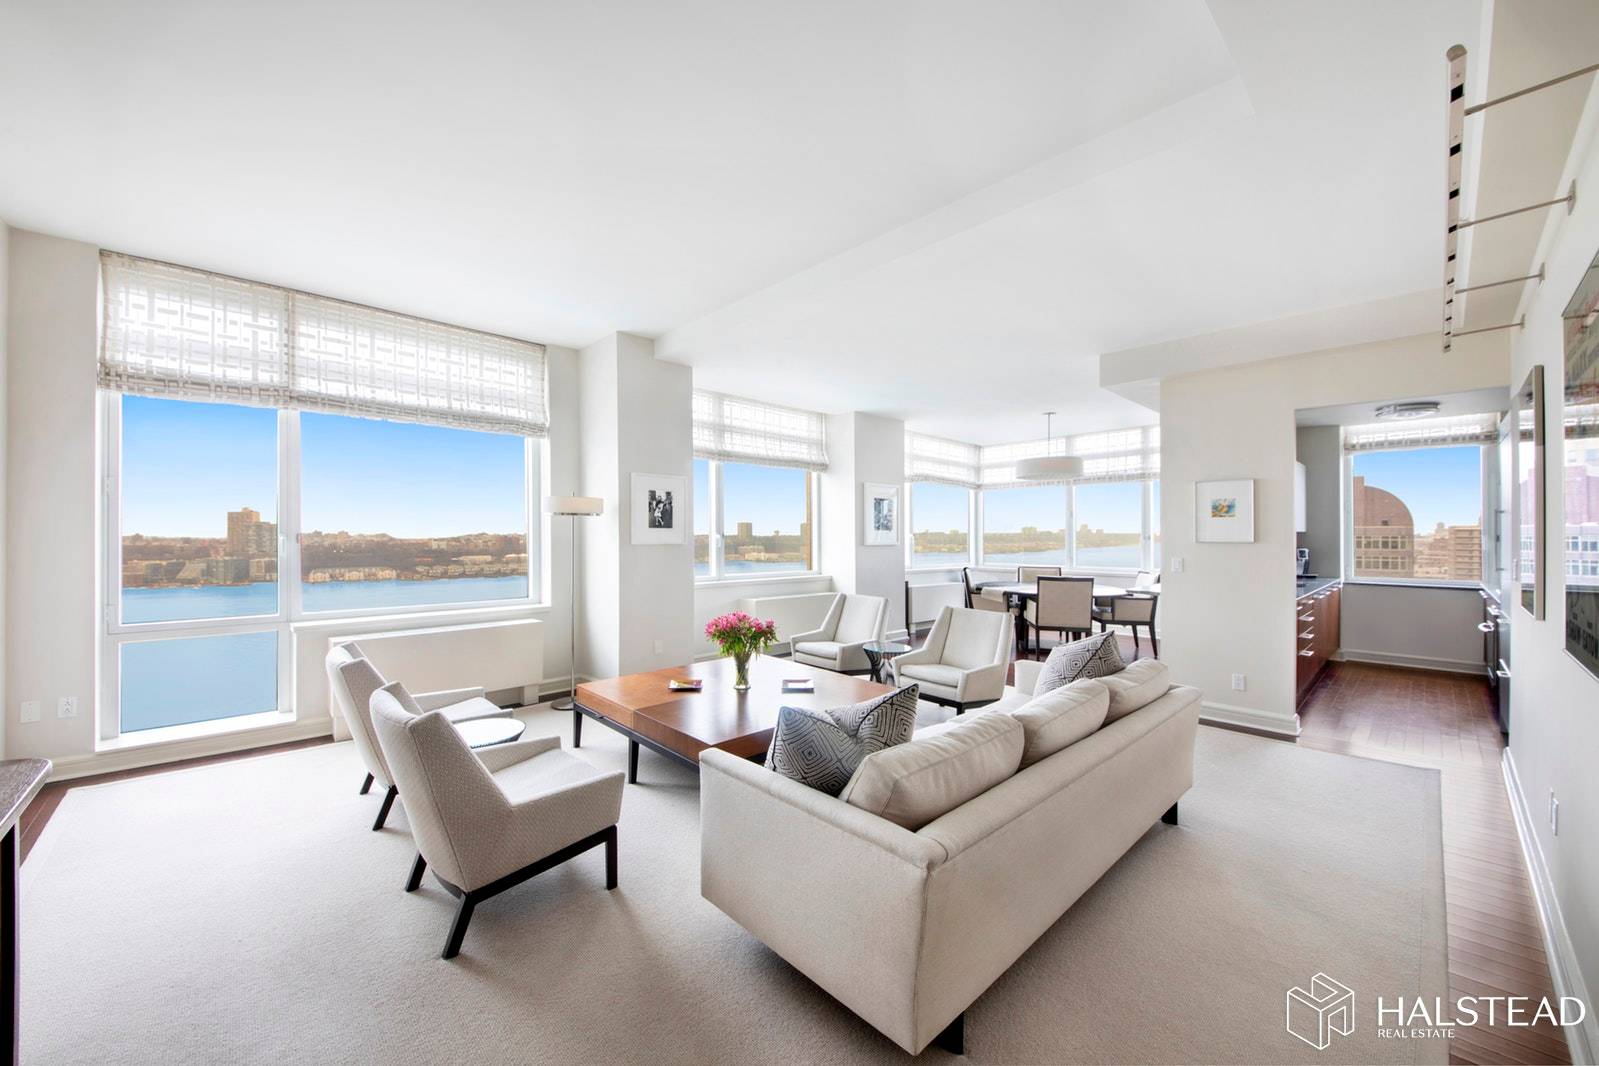 Astounding Hudson River views in this sprawling 3 4 bedroom, 3.